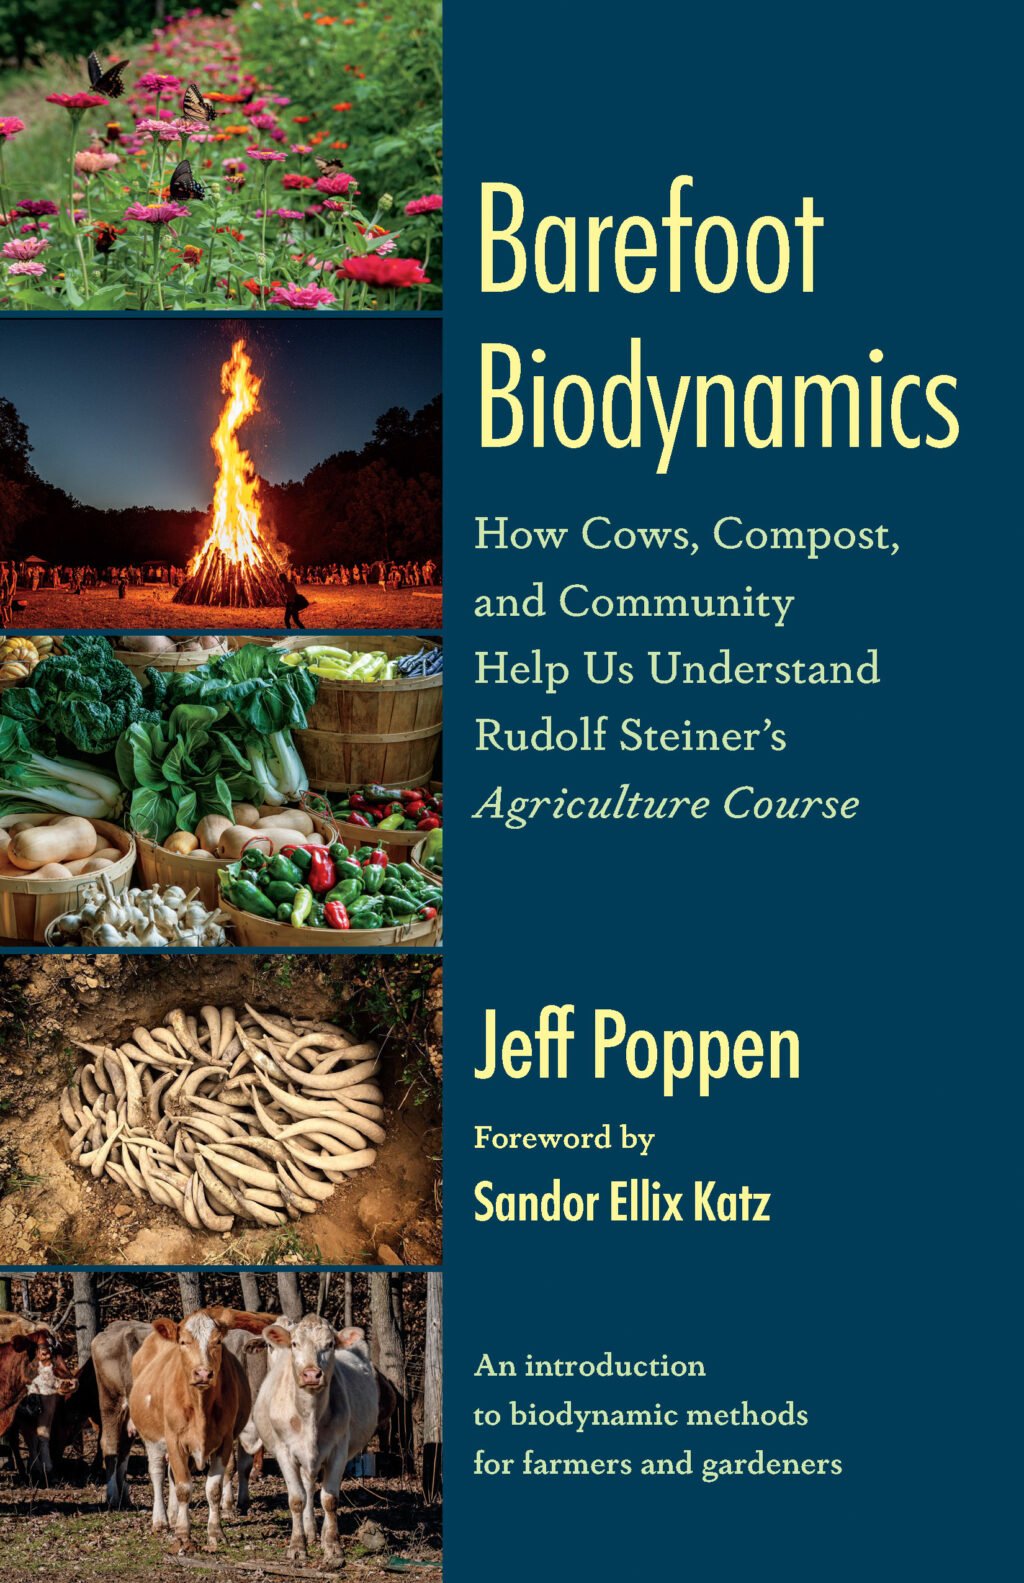 The Barefoot Biodynamics cover